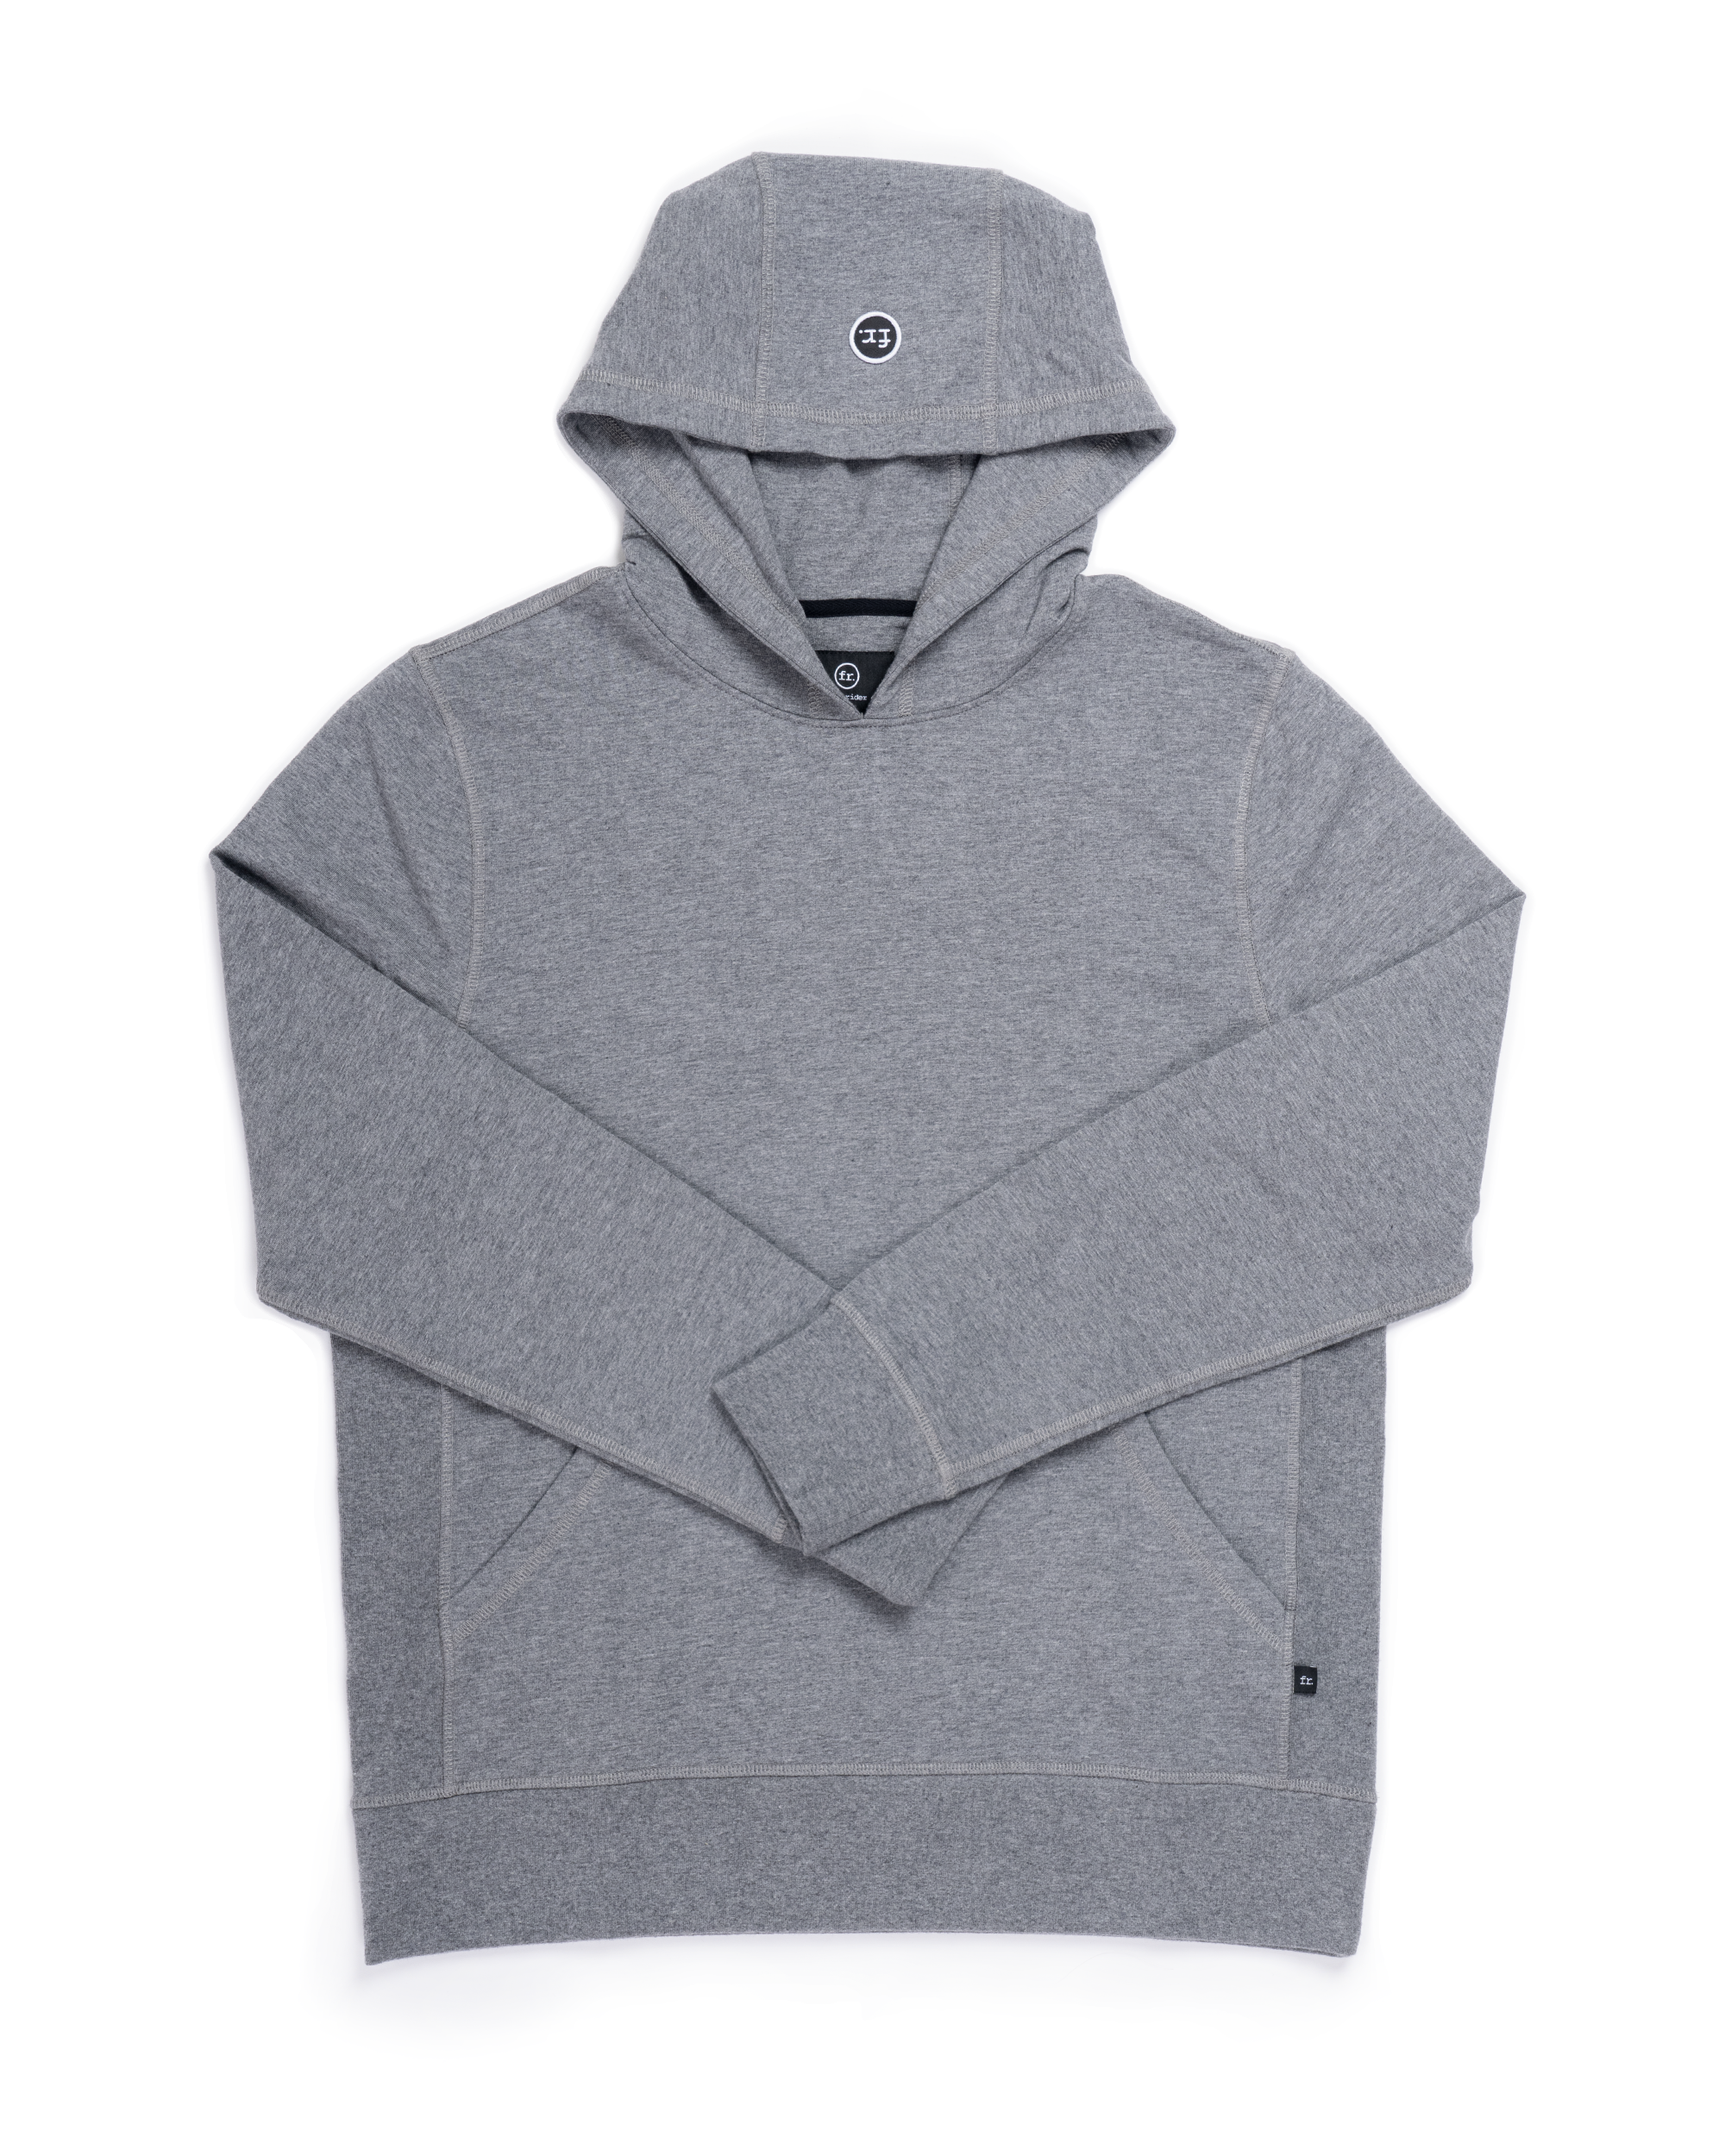 Performance Hooded Pullover Dark Grey Heather - Foreign Rider Co.